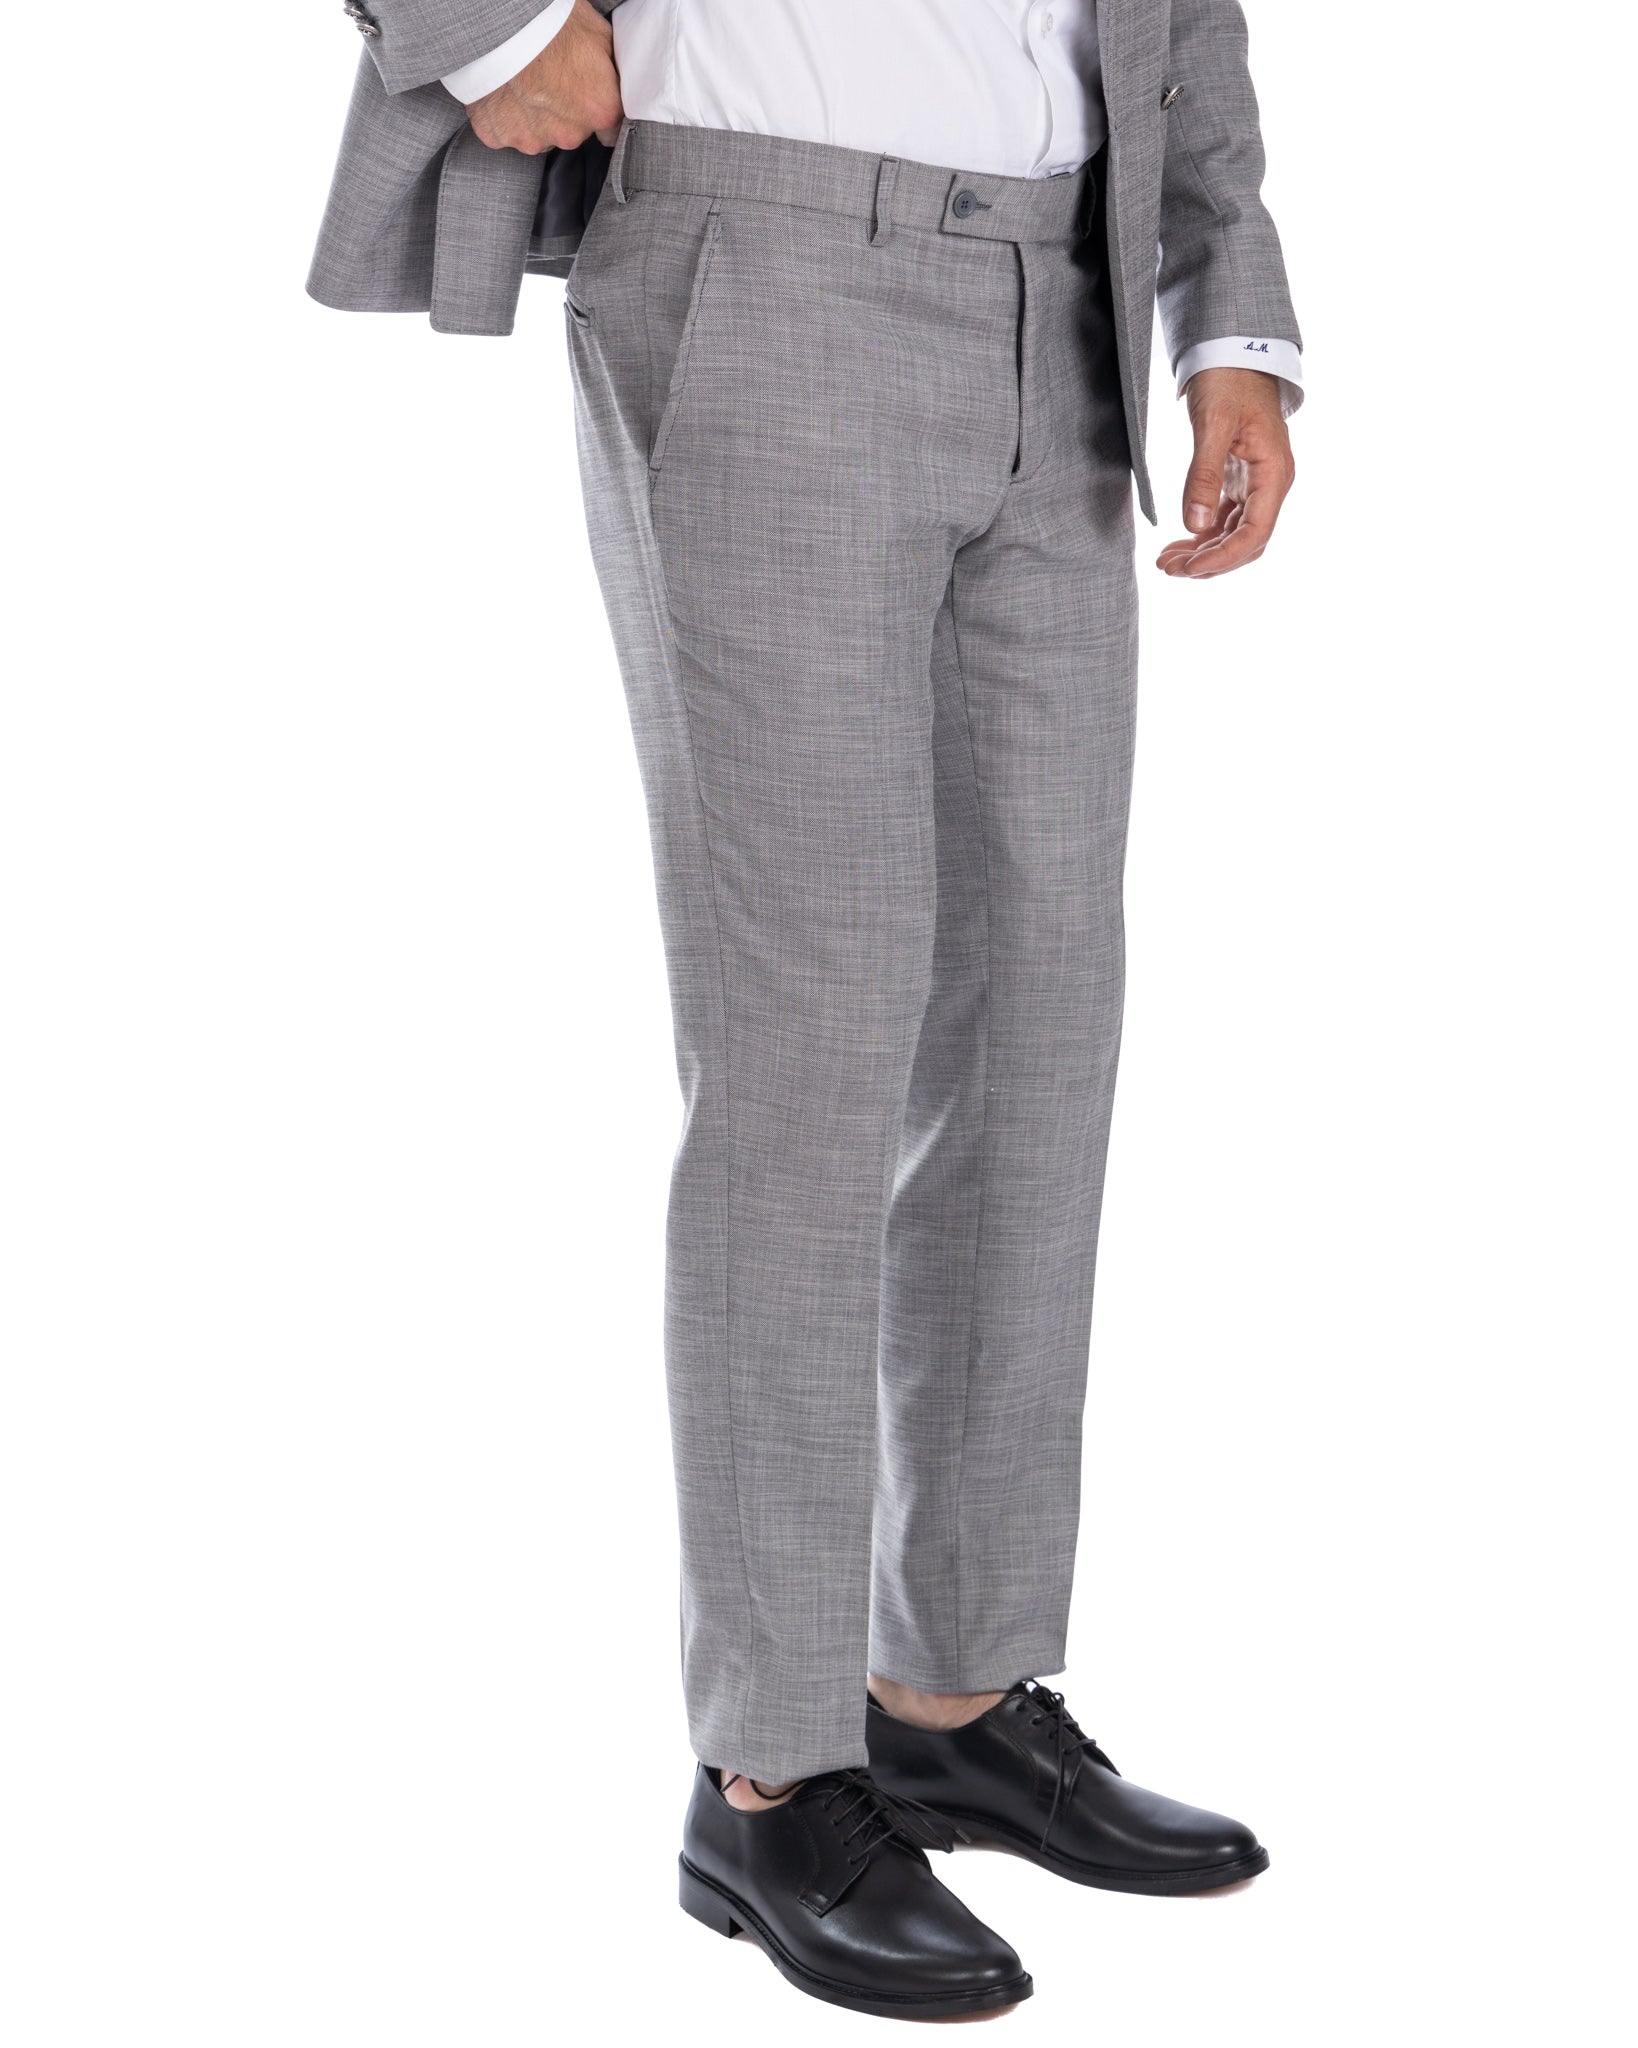 Thun - gray melange double-breasted suit